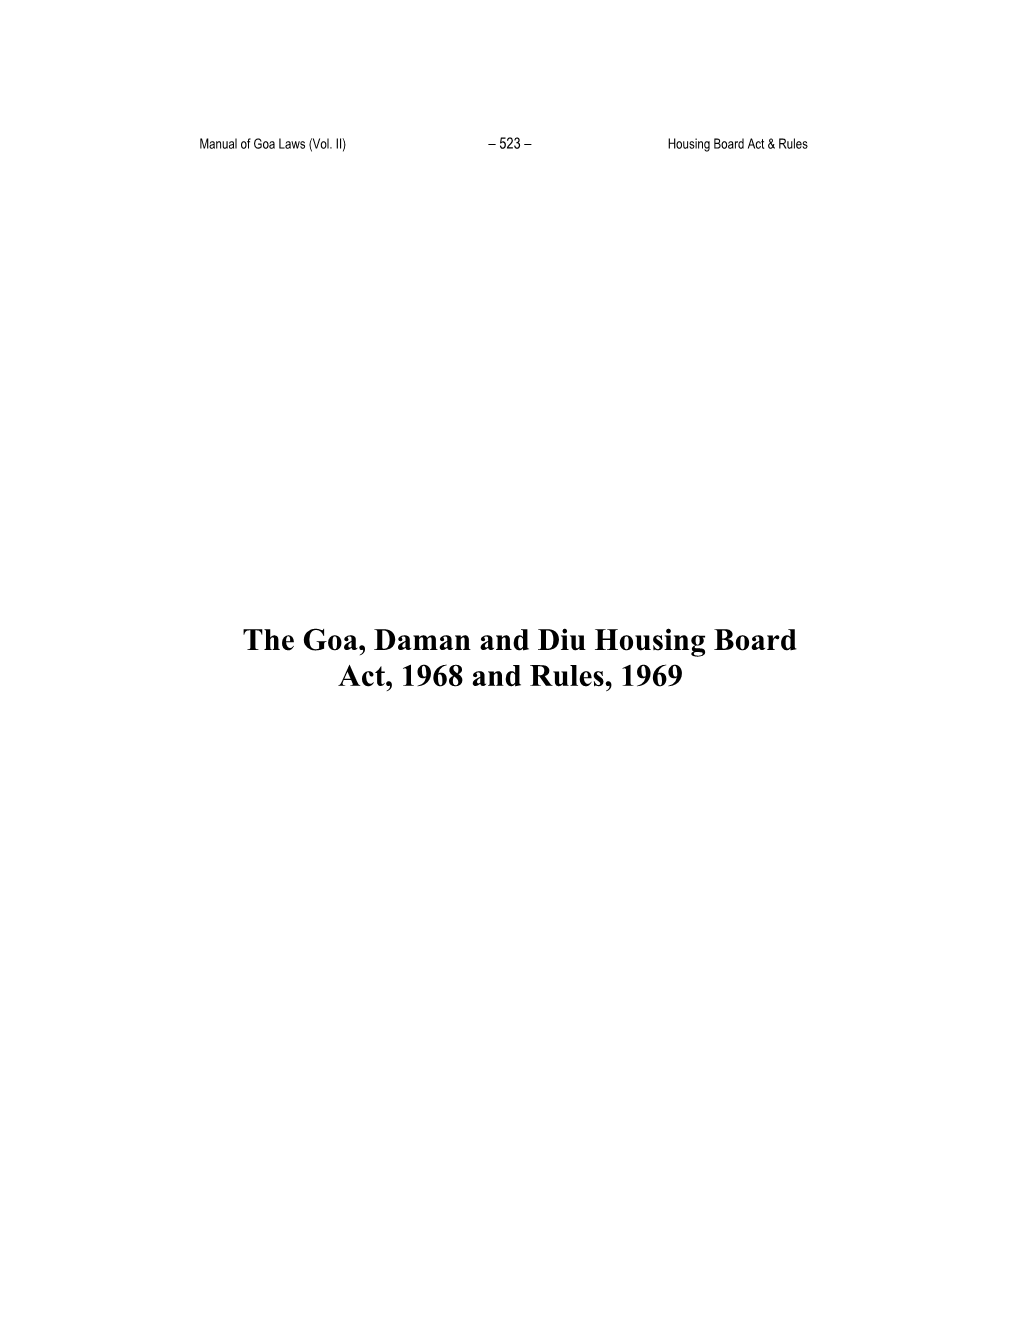 The Goa, Daman and Diu Housing Board Act, 1968 and Rules, 1969 Manual of Goa Laws (Vol